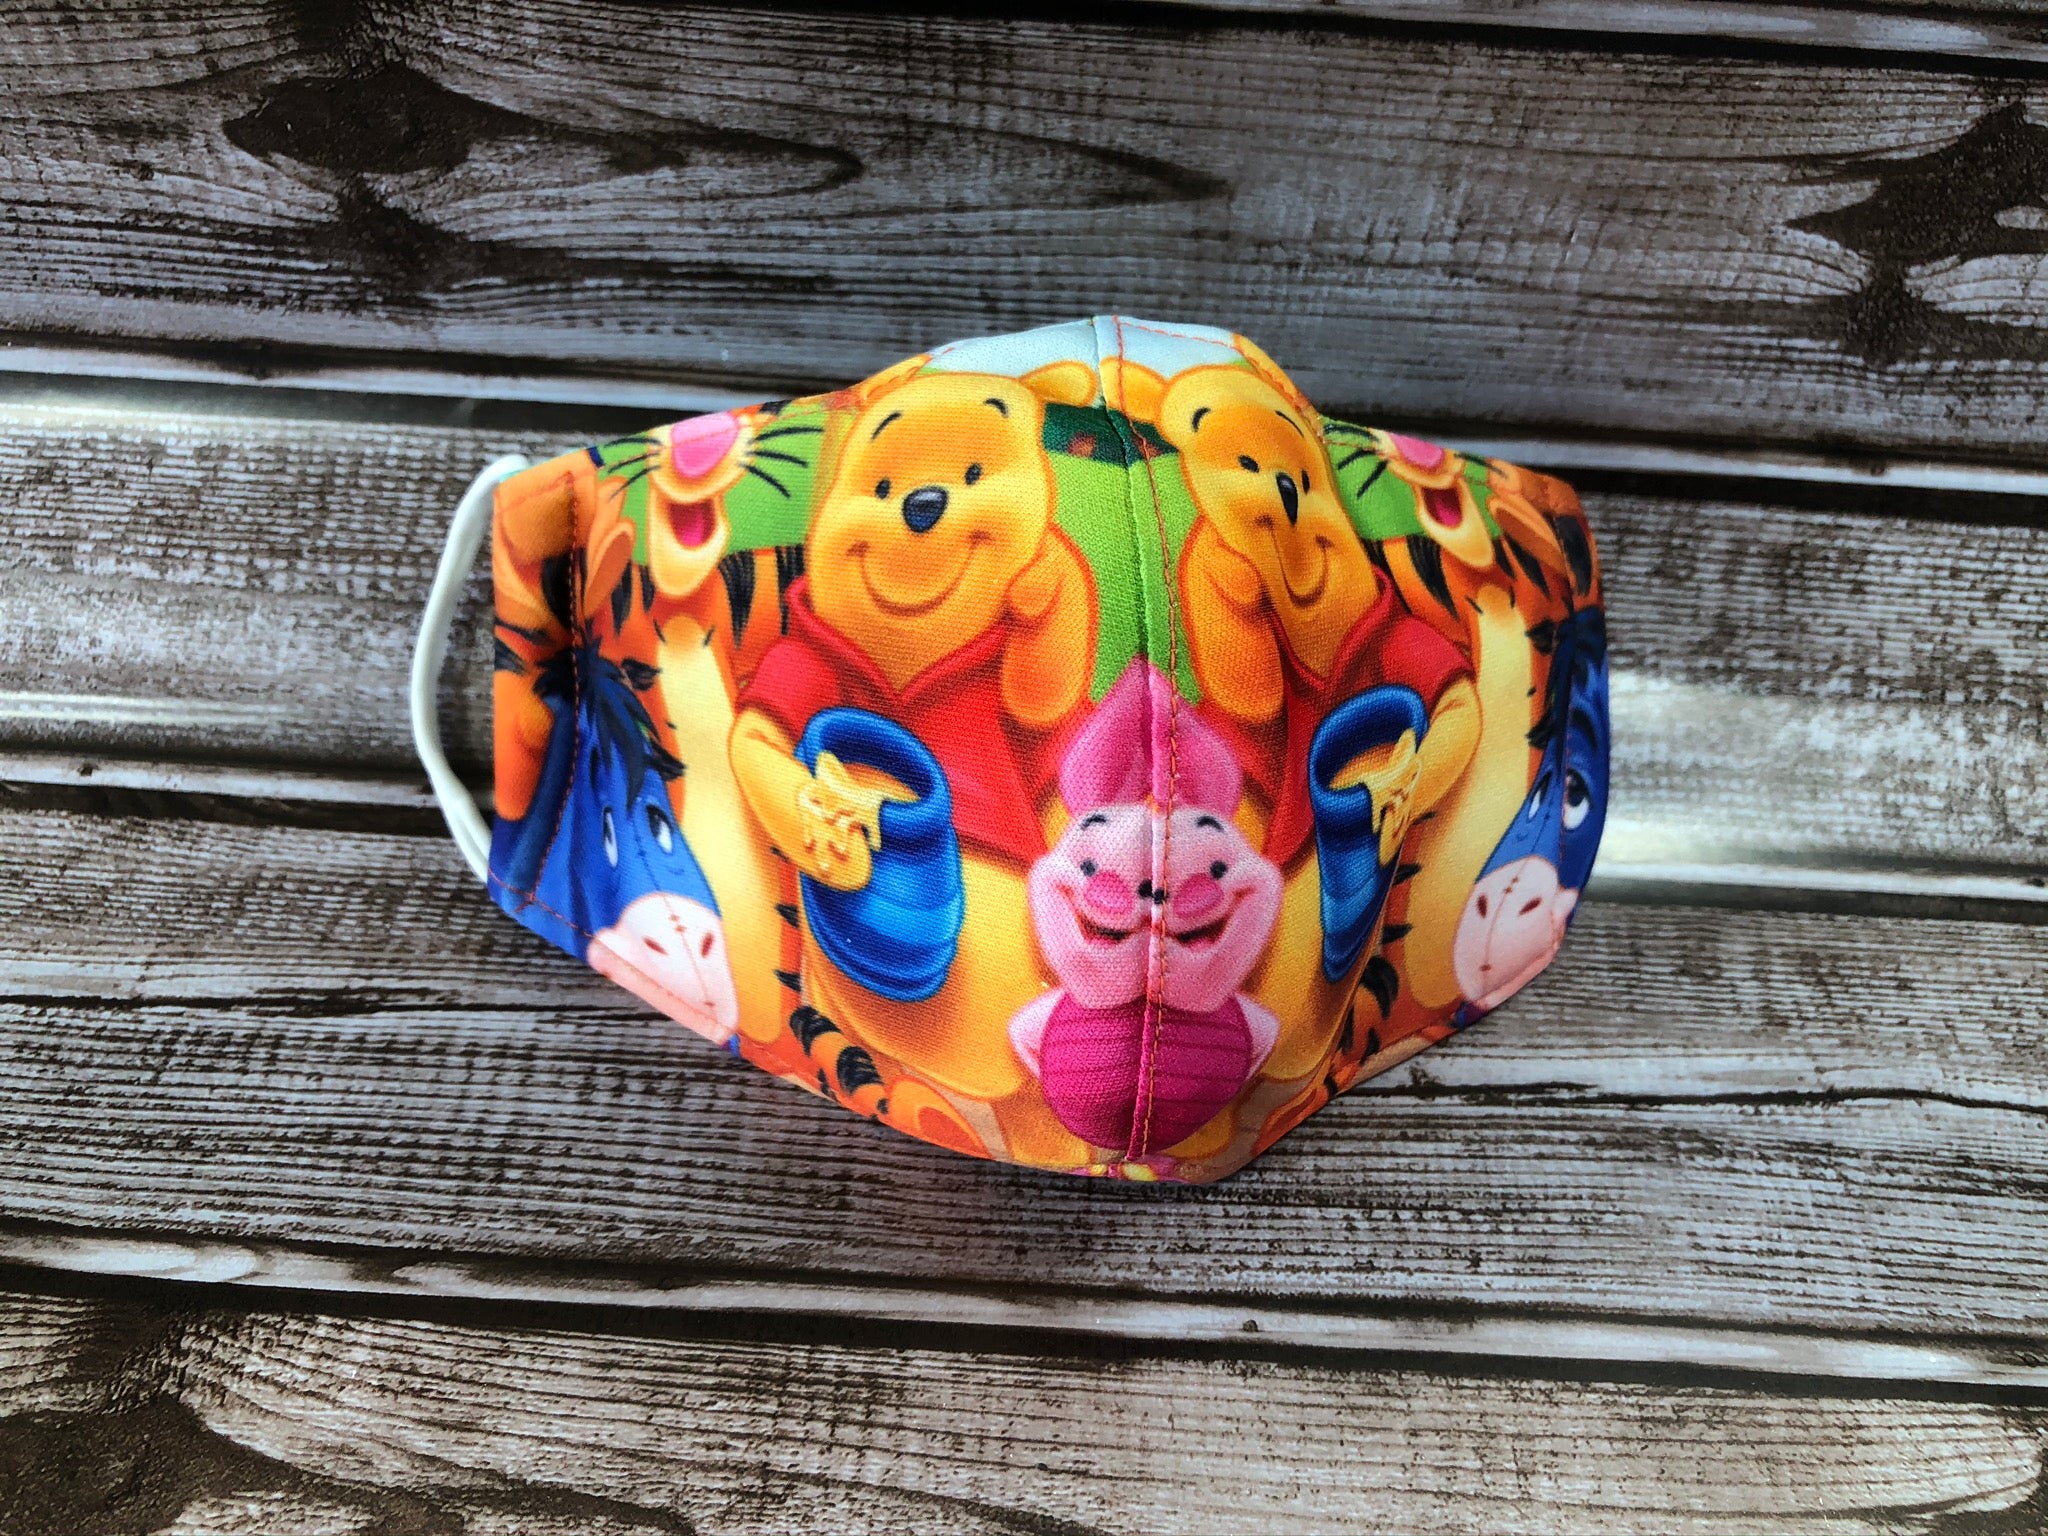 Winnie the Pooh, Piglet, Tigger, Donkey face mask for girls 5-10 years old